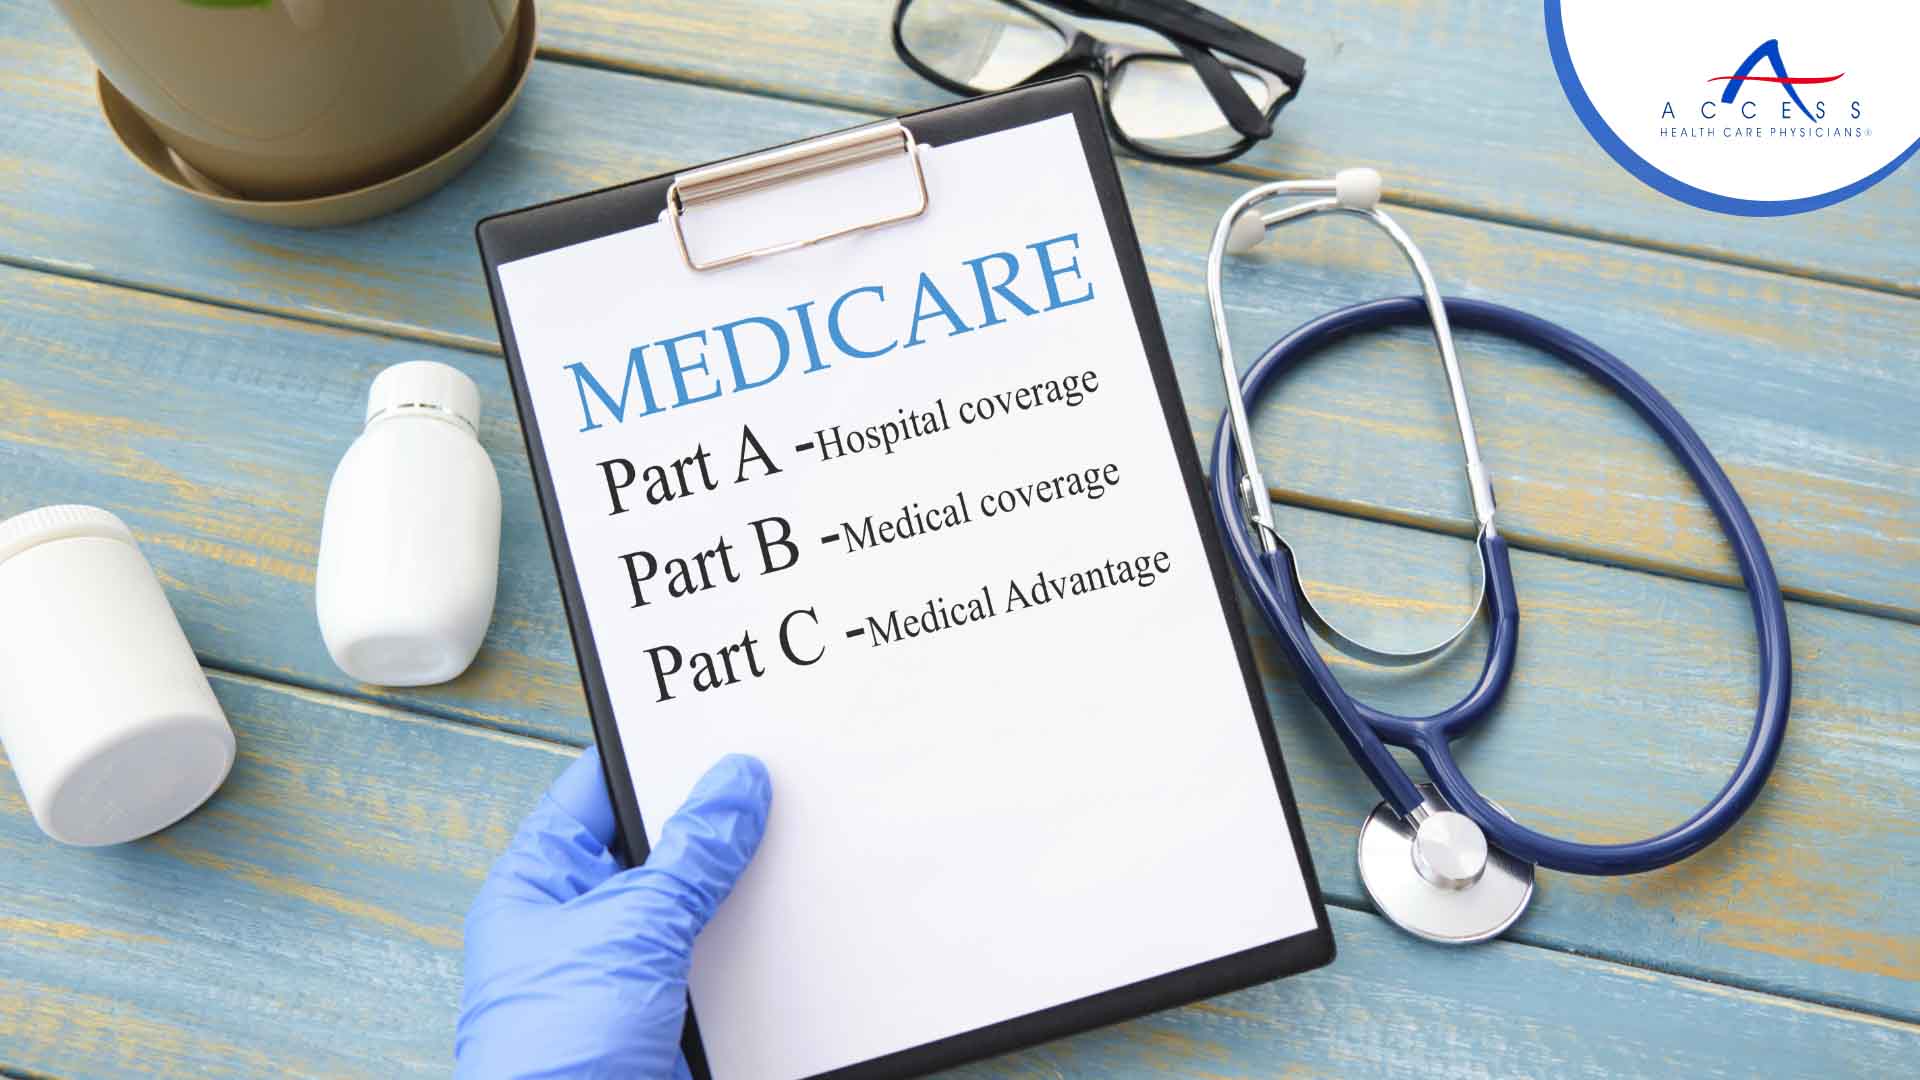 Difference between OEP and AEP — Access Health Care Physicians, LLC